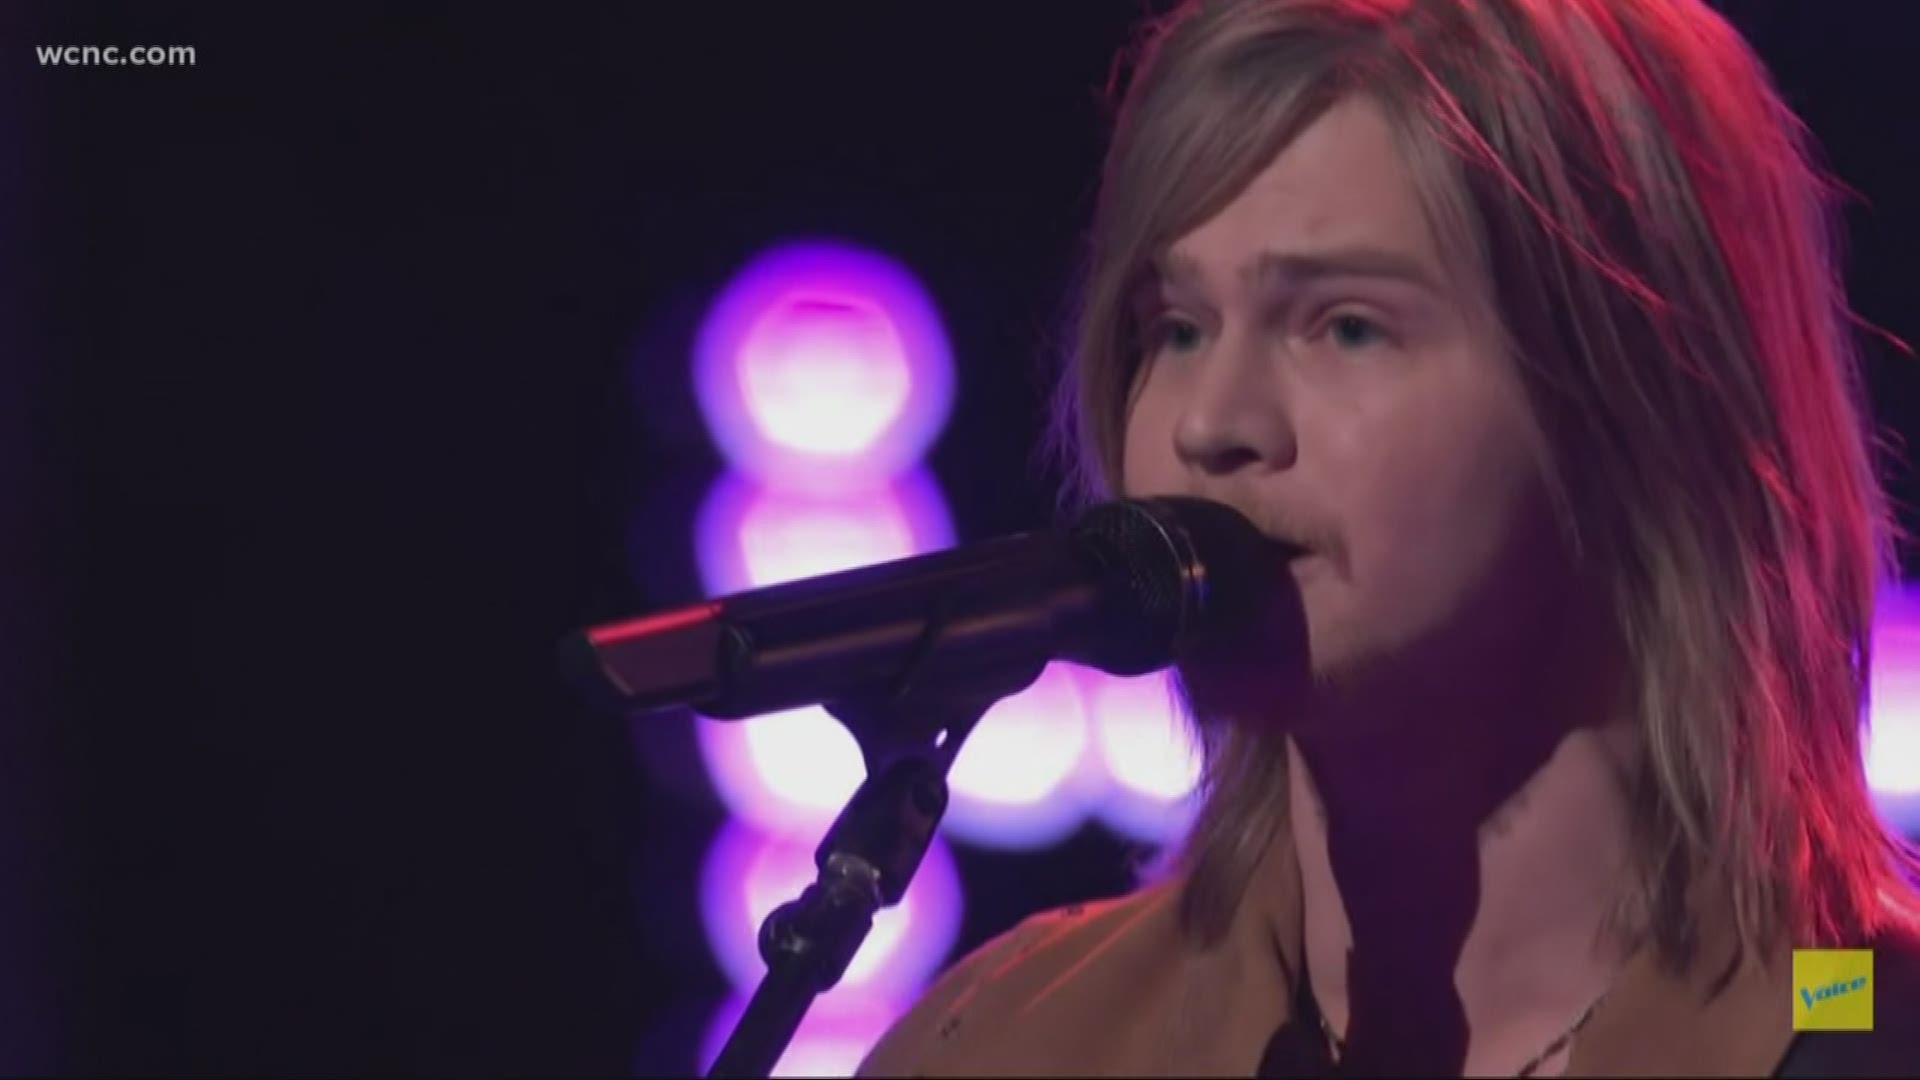 Tega Cay's Jake HaldenVang will be featured on "The Voice" Monday night, alongside 19 other artists.